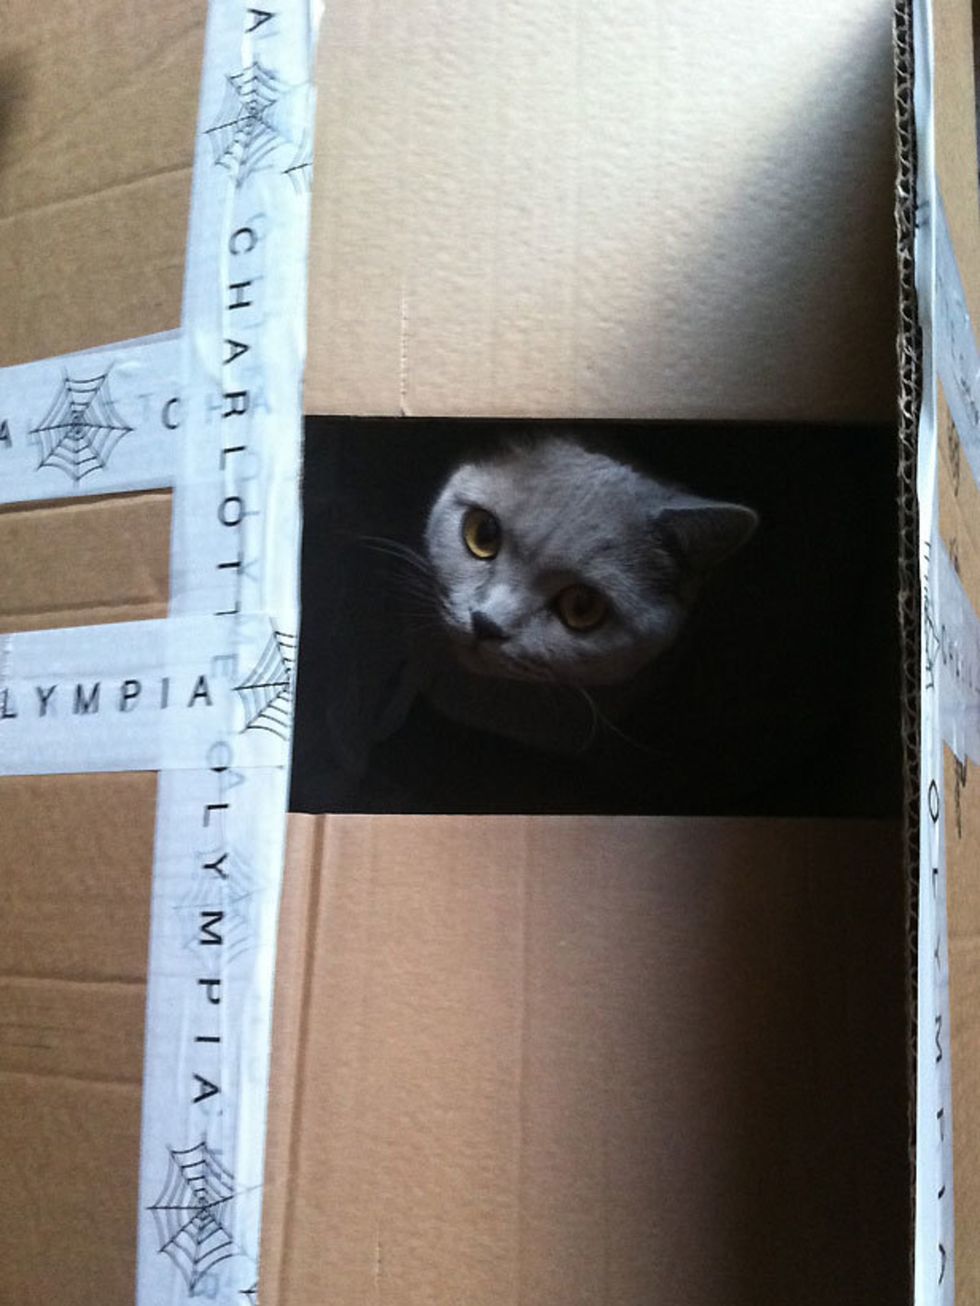 <p><a href="http://www.elleuk.com/catwalk/collections/clements-ribeiro/">Clements Ribeiro</a> designer Suzanne Clements: Our good luck charm is our lucky cat that follows us around and sleeps in all the boxes . Here she is inside the delivery box for our